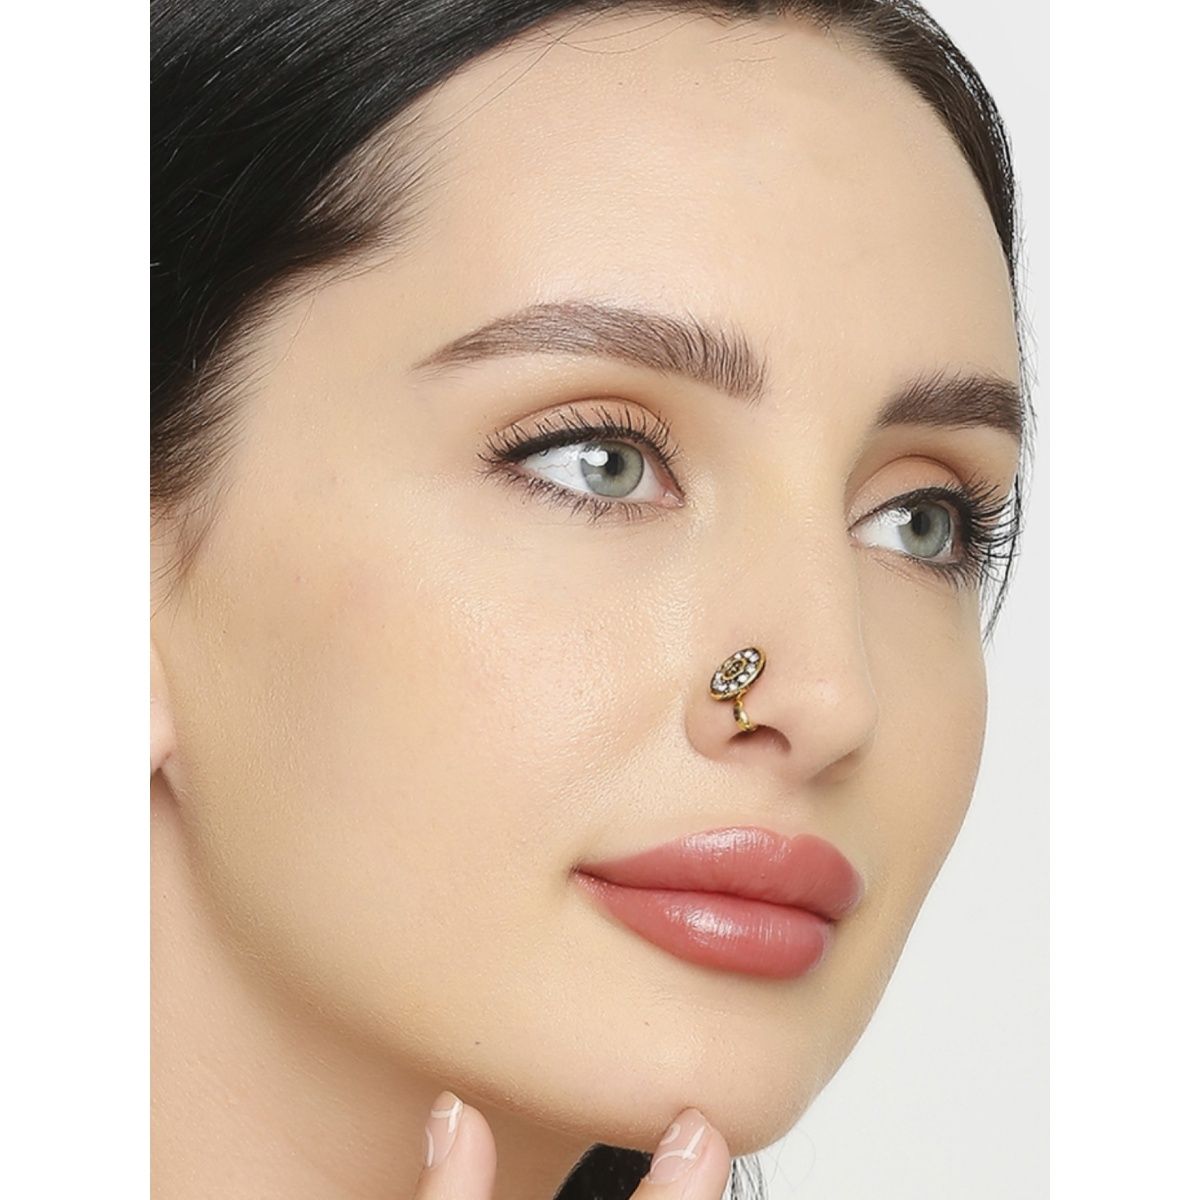 XIAQUJ Perforation Free Nose Ring Series Piercing Jewelry Clip Nail Nose  Punk Ring Nose Style U-shape Nose Jewelry F - Walmart.com